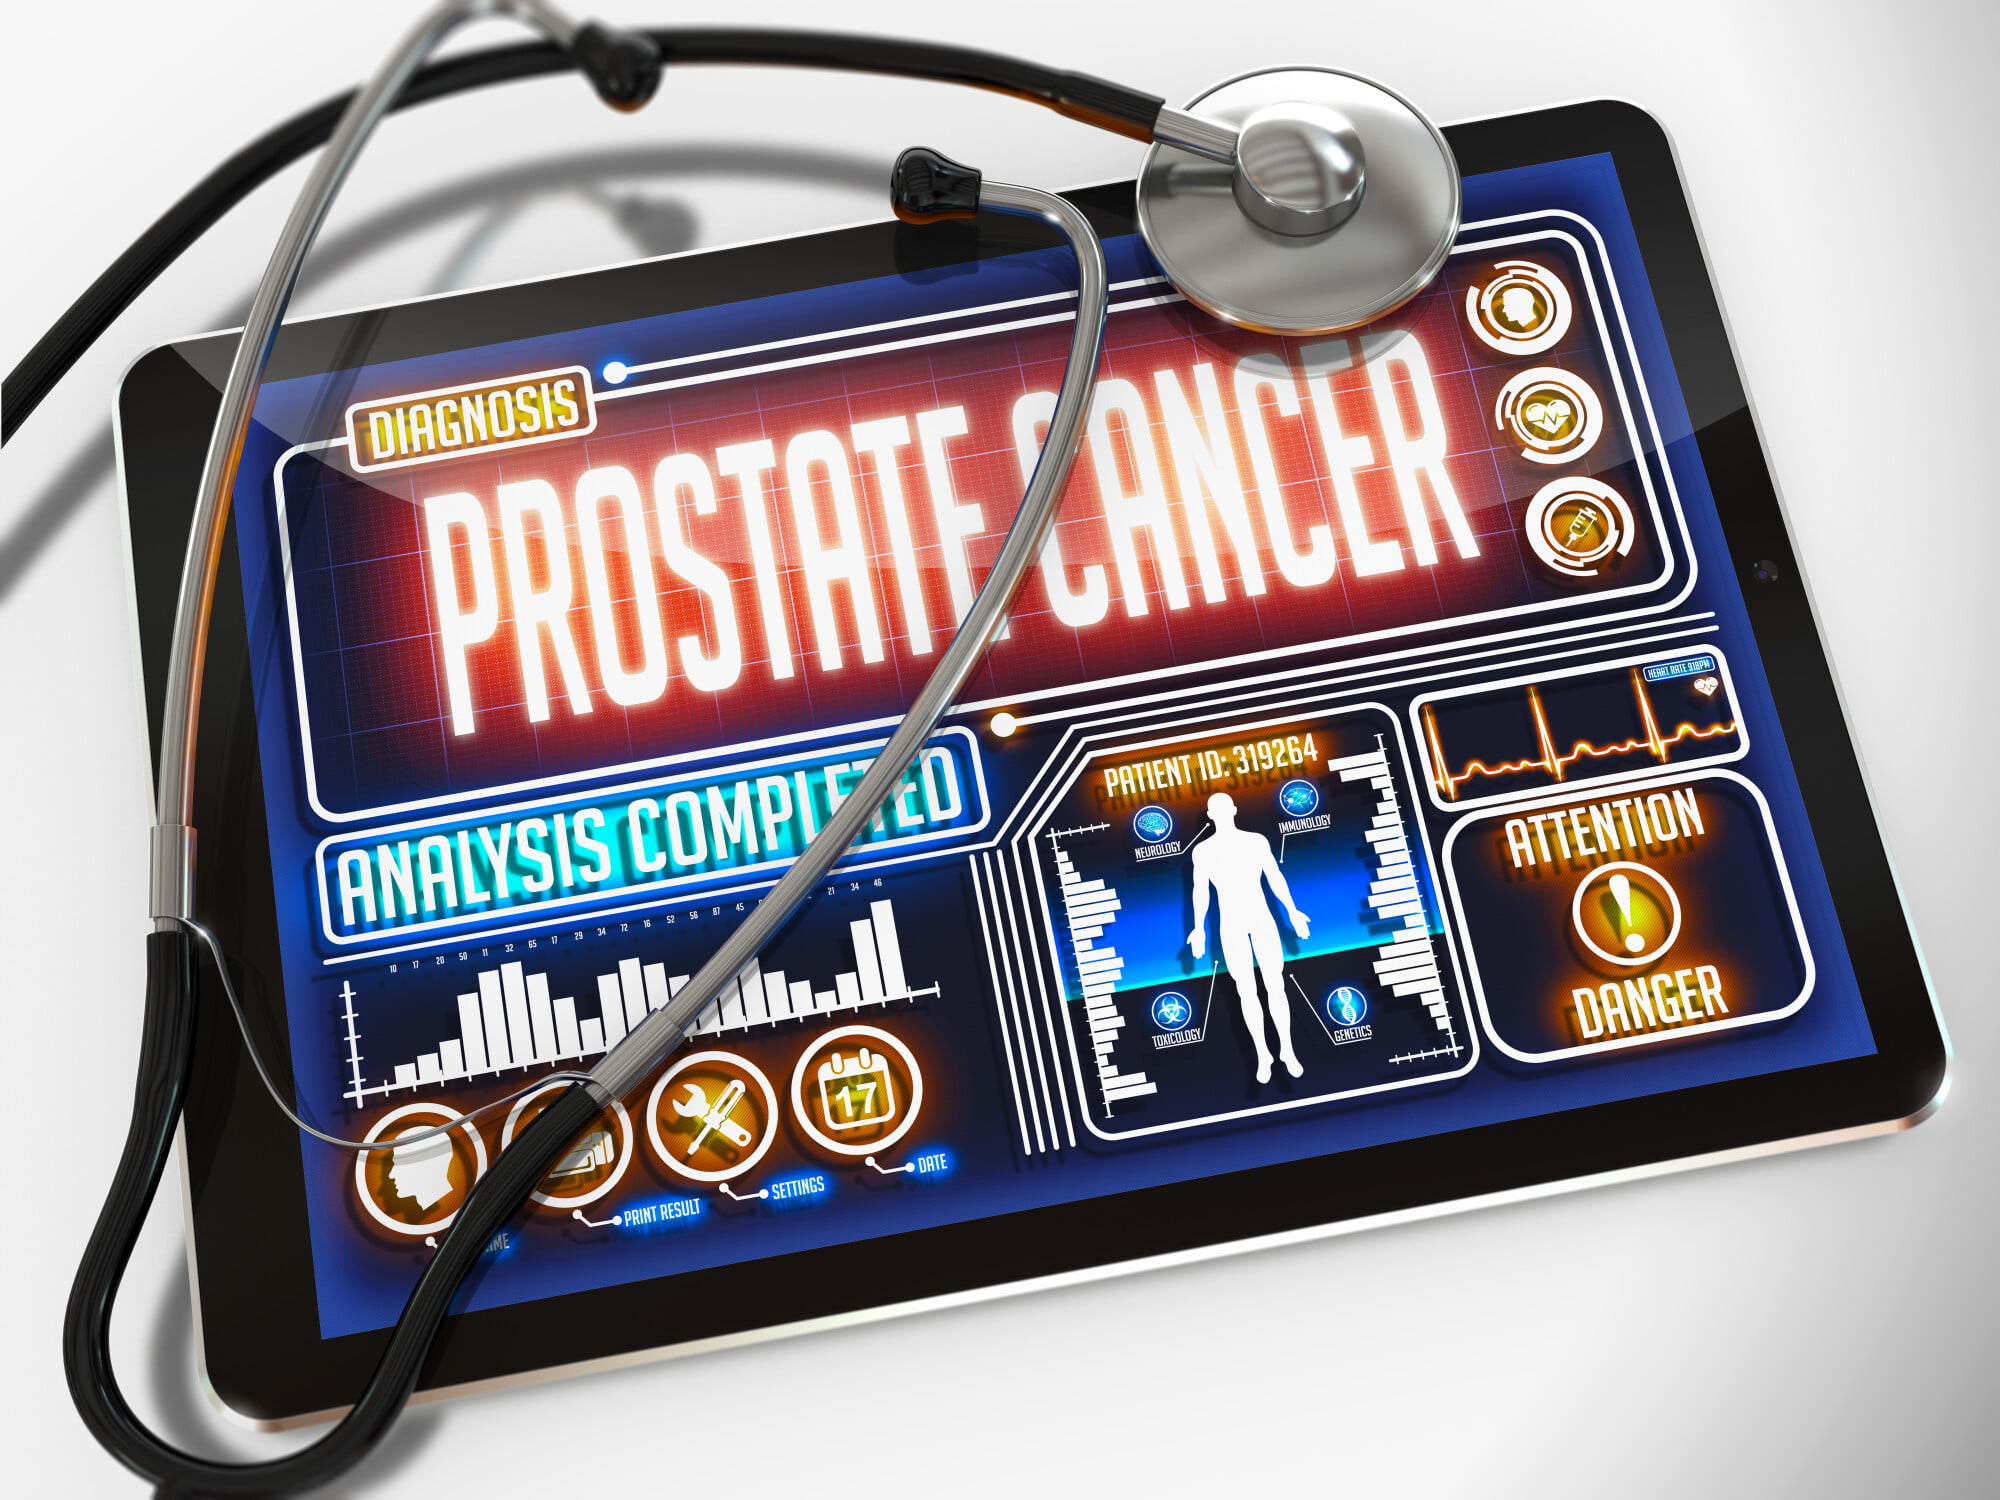 Your prostate is easily forgotten, but you should focus on this organ's health. Here are five ways to have a healthy prostate.